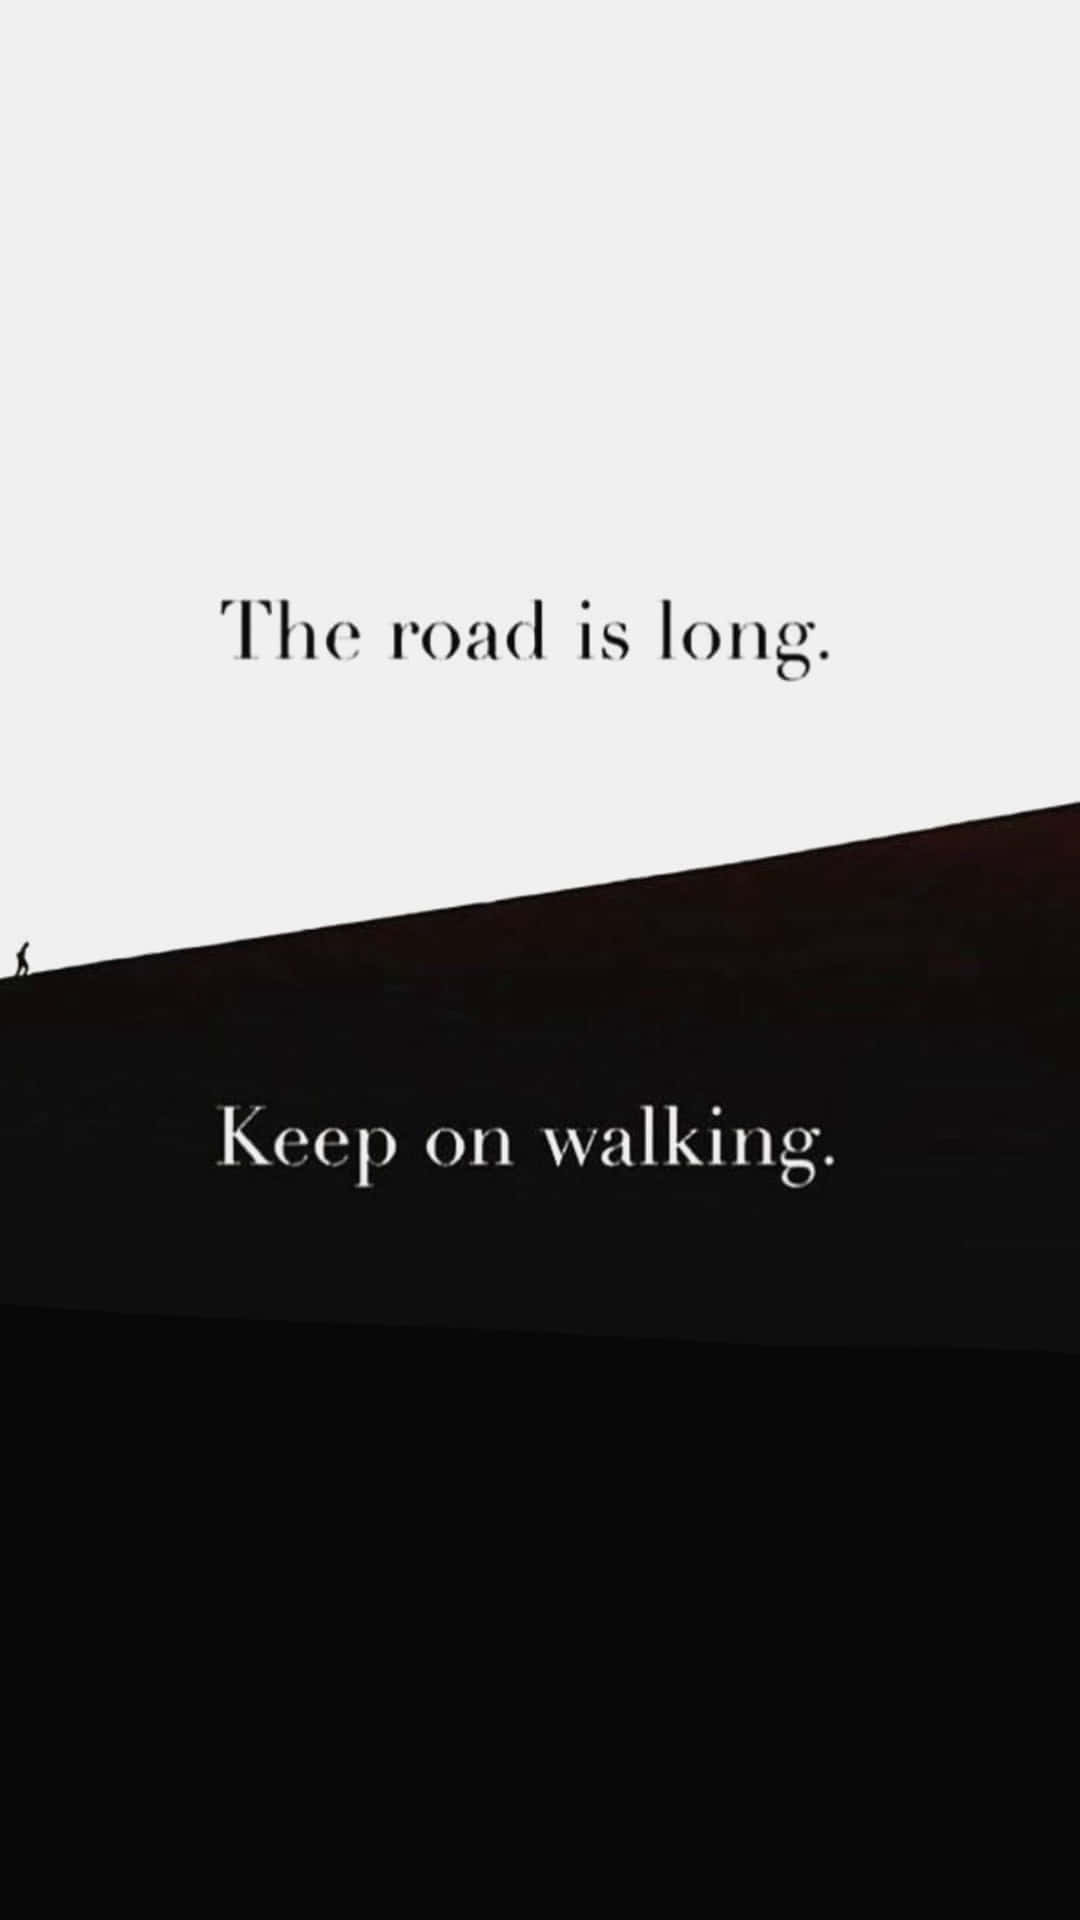 The Long Road Inspirational Quote Wallpaper